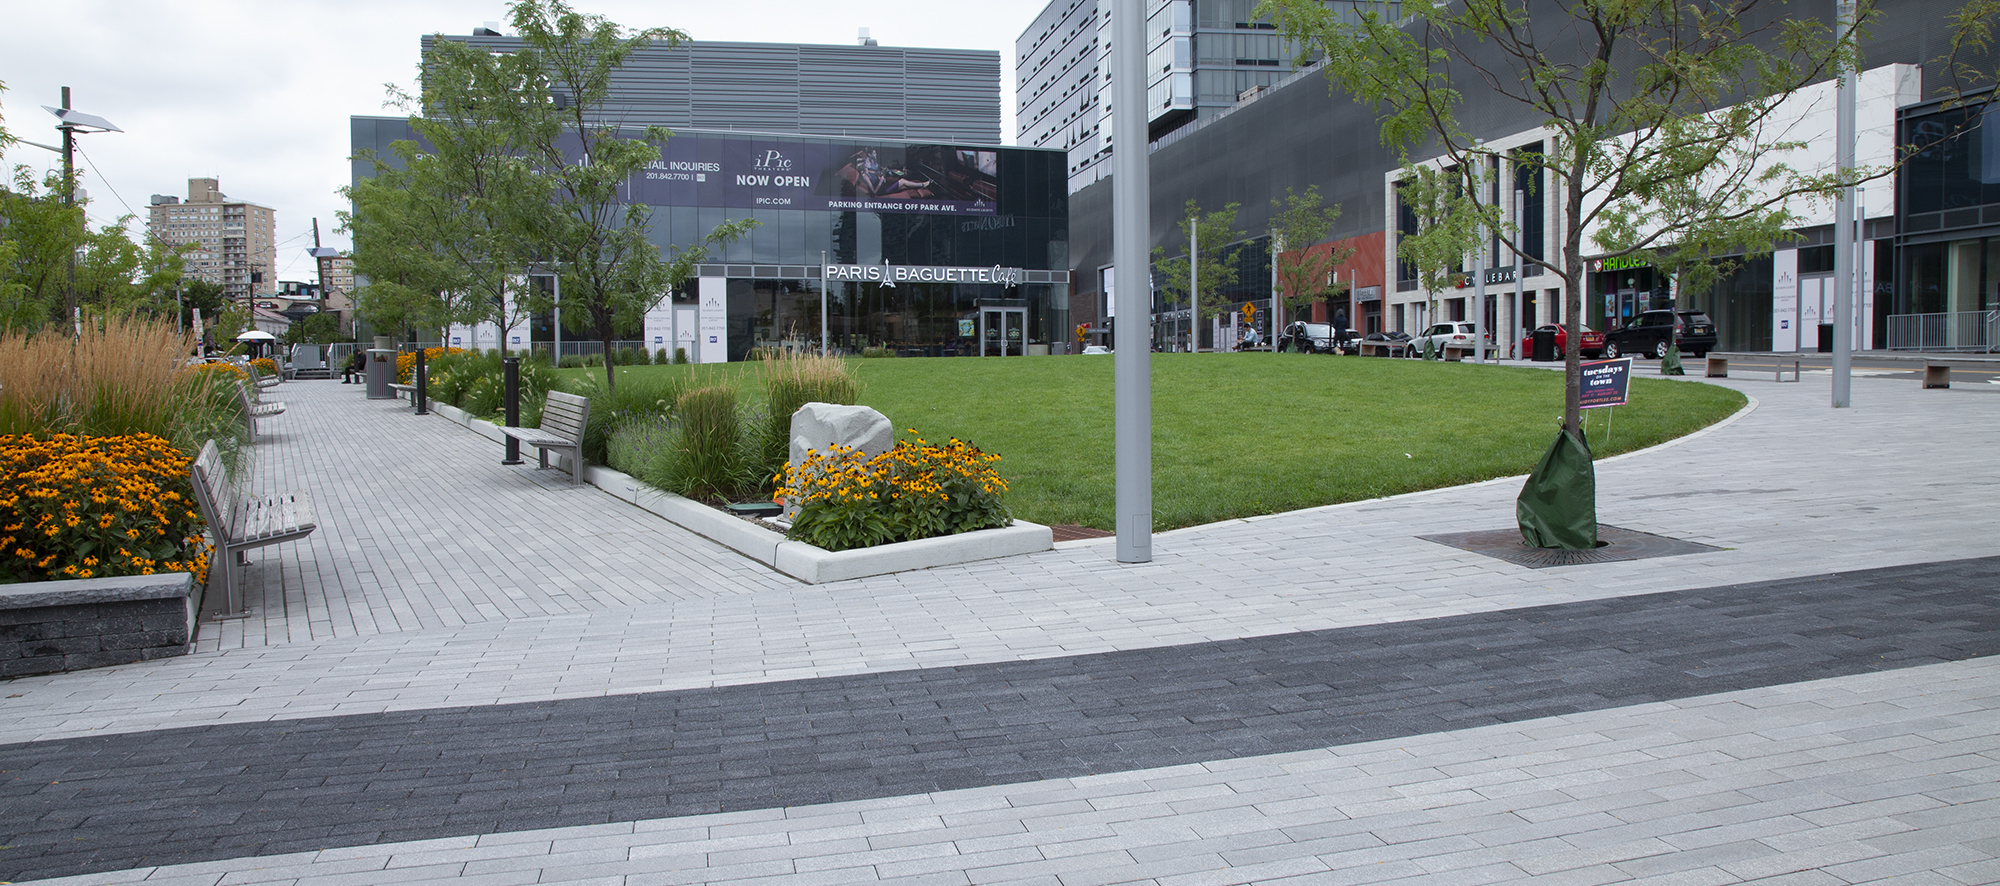 Grey and black Promenade Planks laid in a running bond pattern lead to the entrance, passing a set of garden islands and park benches.